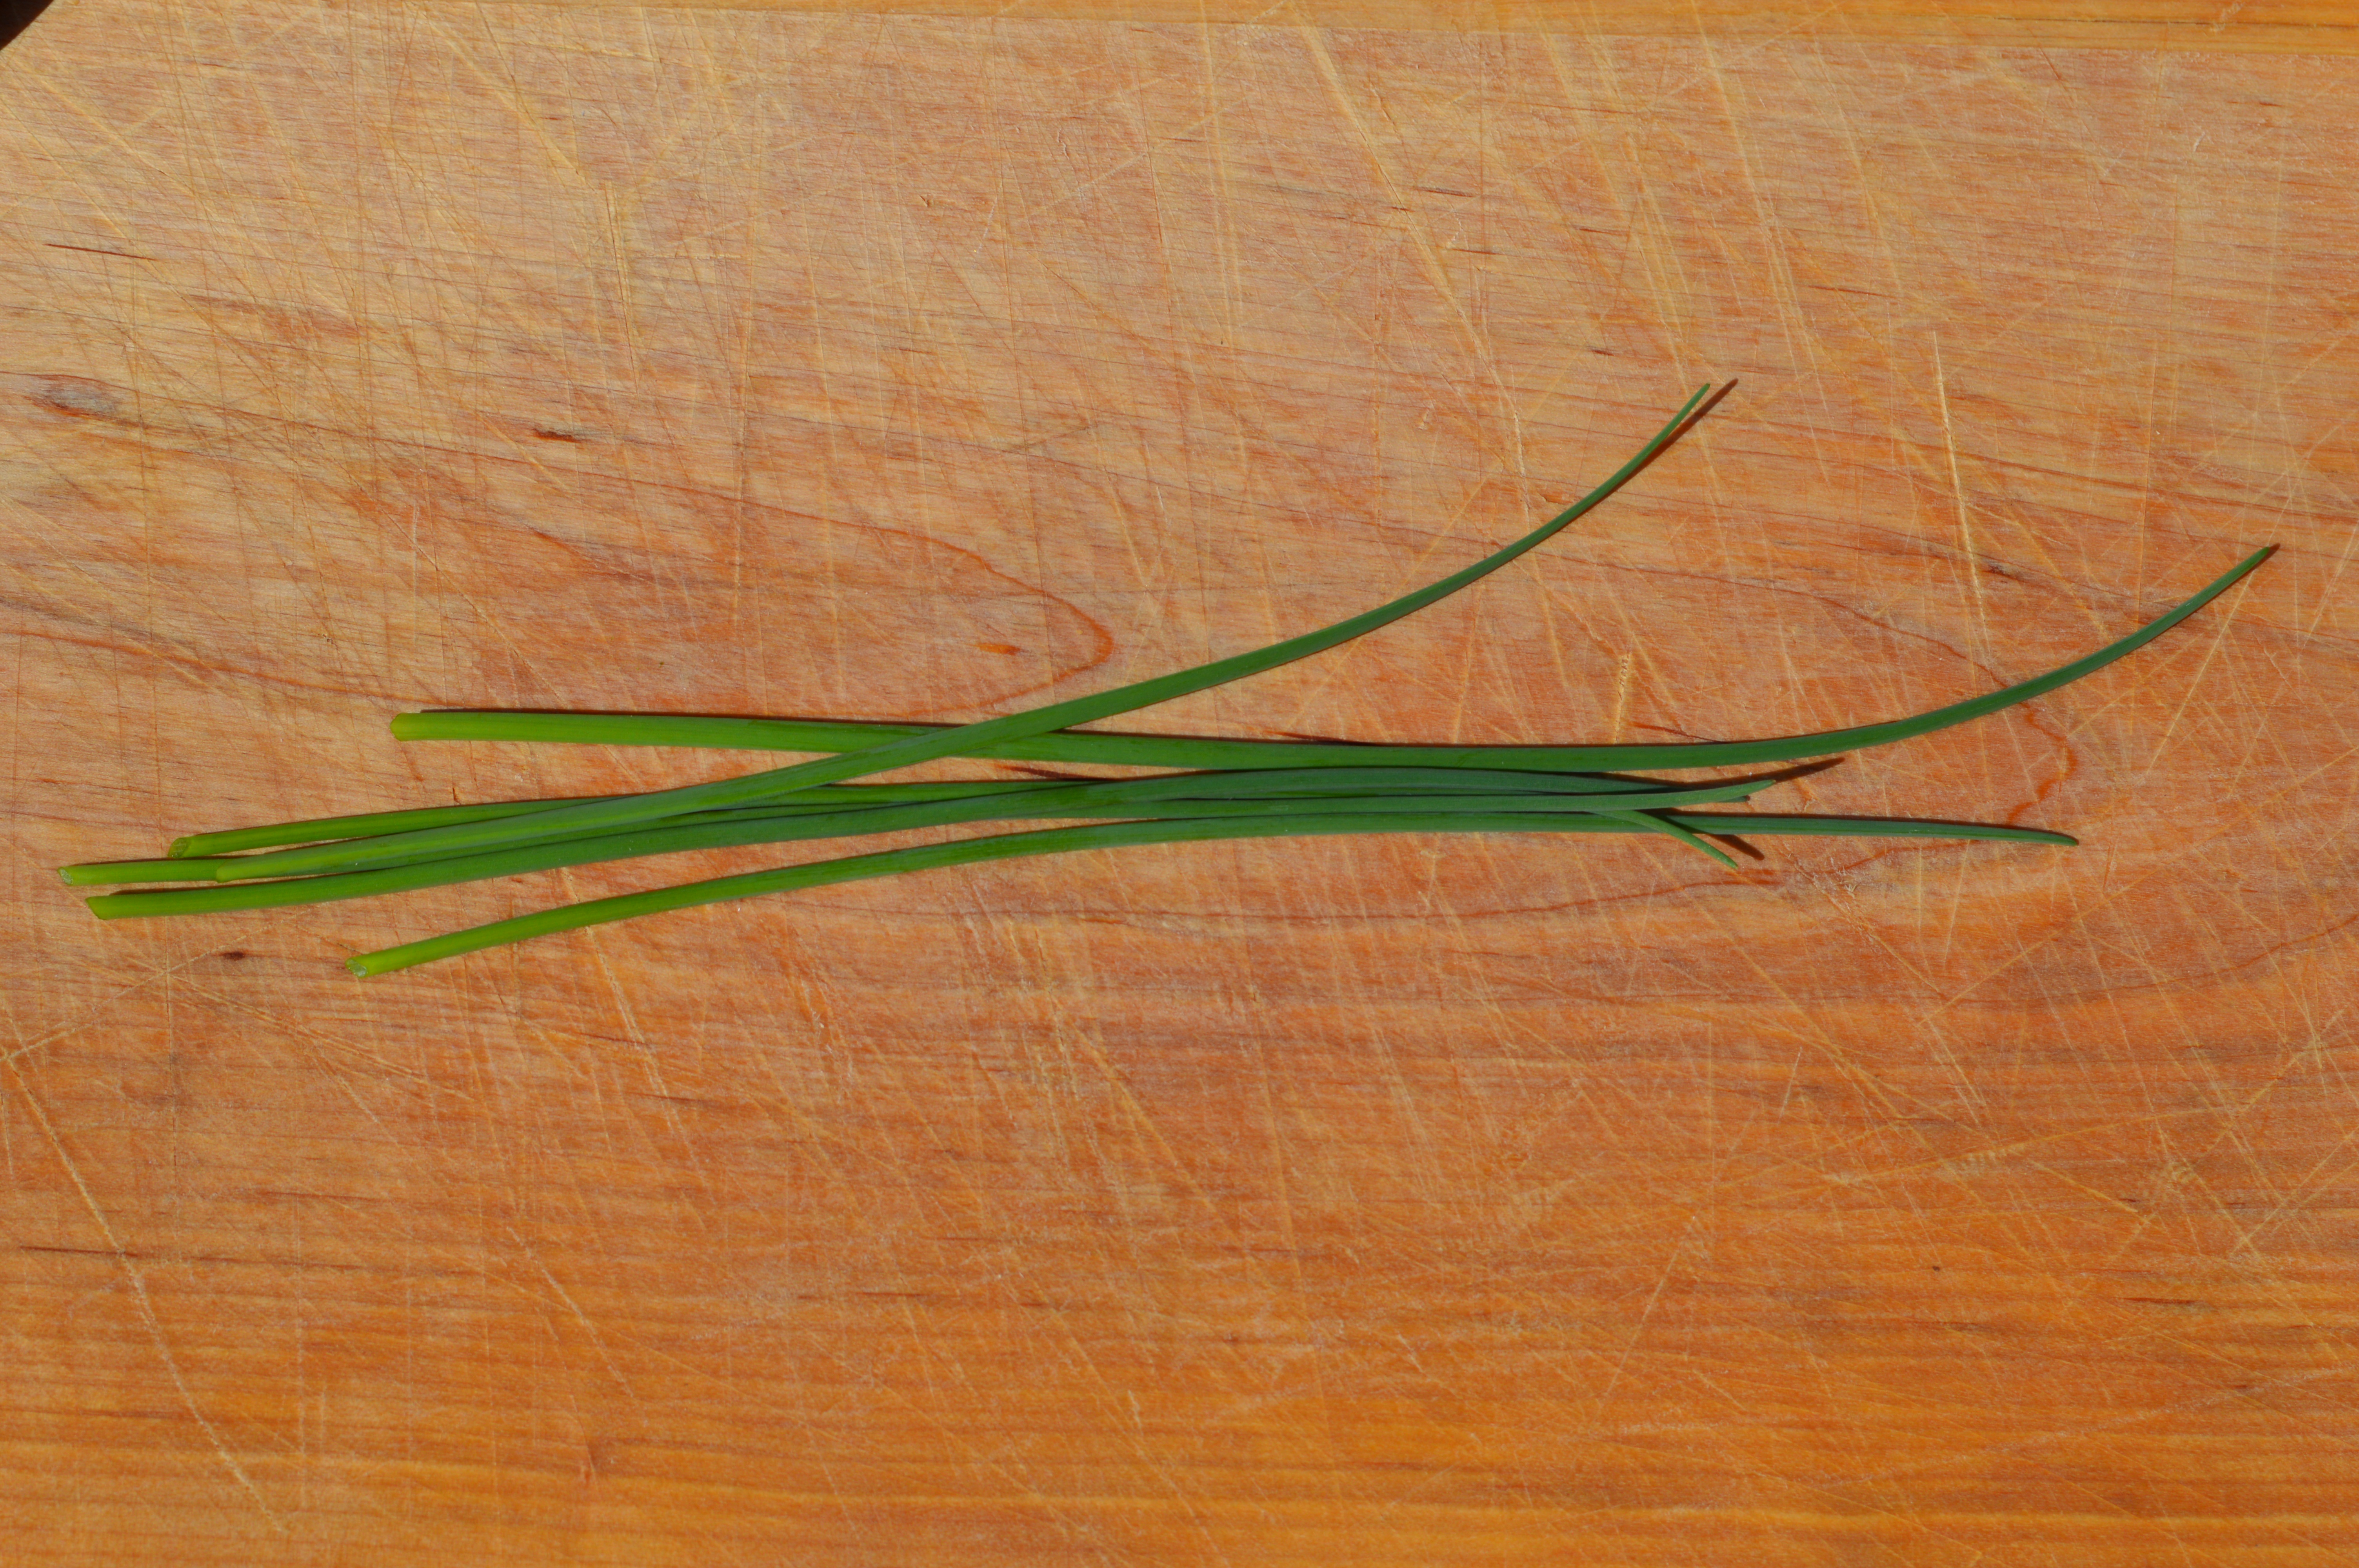 Whole chive stalks